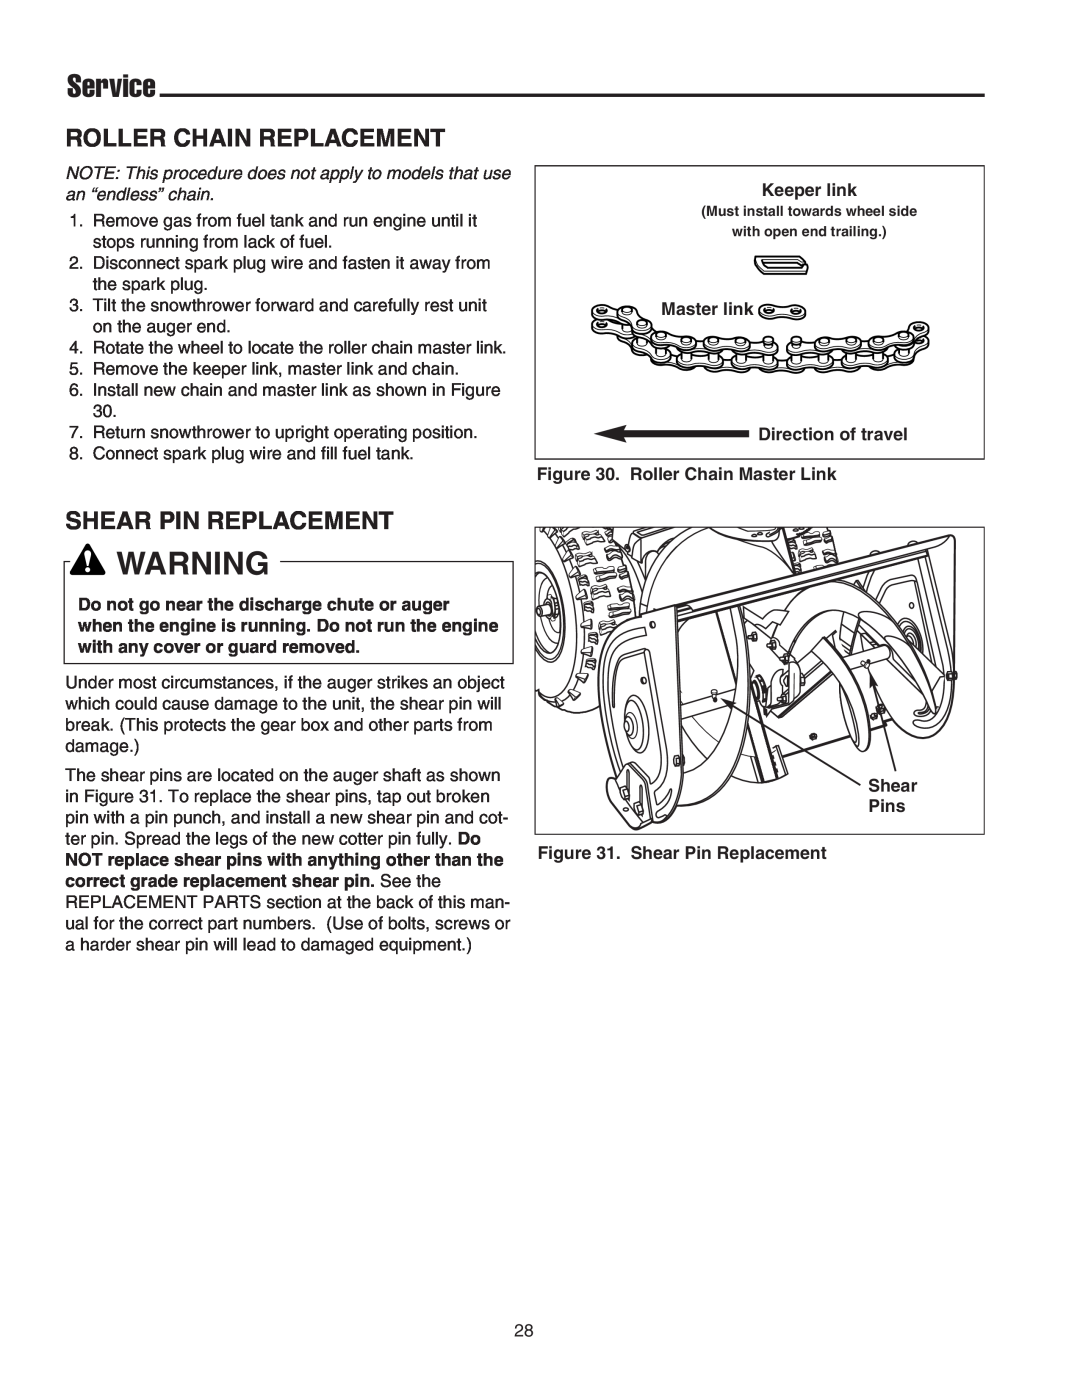 Simplicity 755, 555, 1694433, 1694434 instruction sheet Roller Chain Replacement, Shear Pin Replacement, Service 